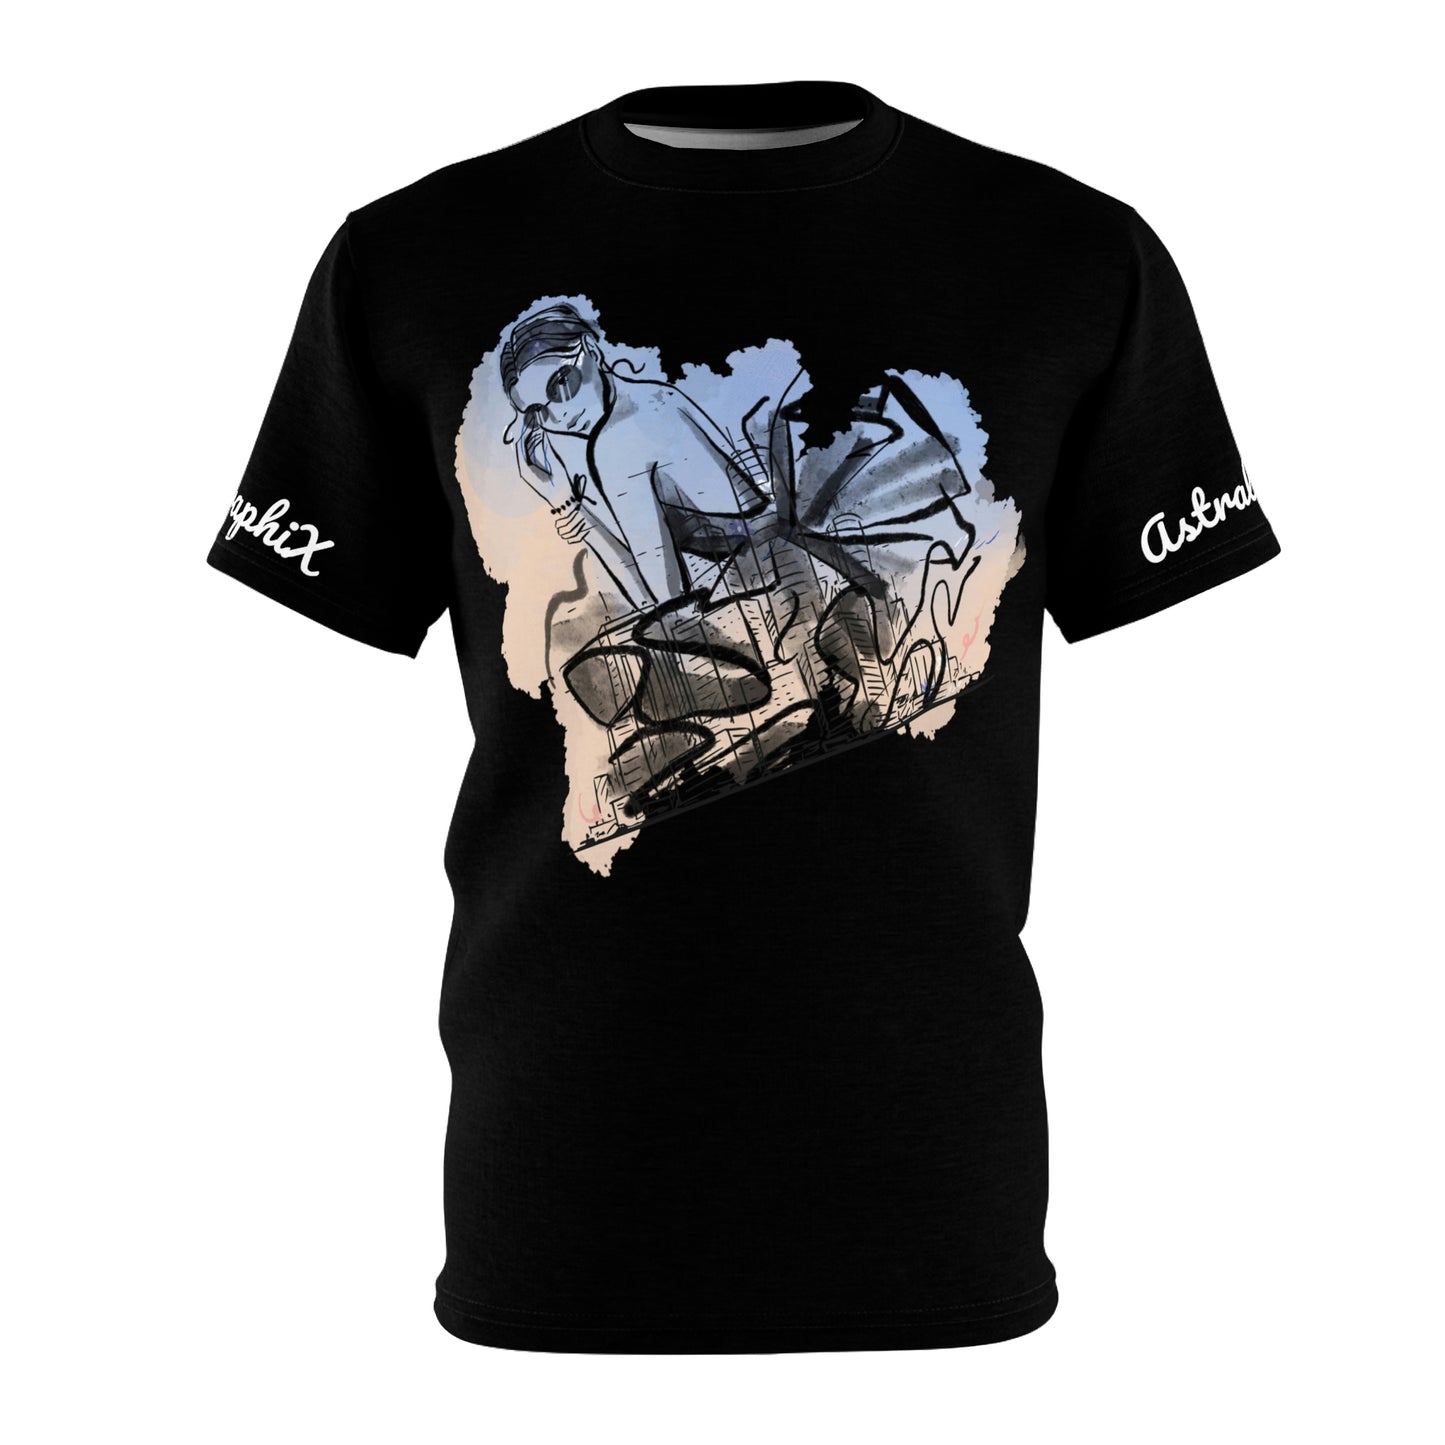 Art Work Collection - Unisex AOP Cut & Sew Tee - Dressed Up in Black